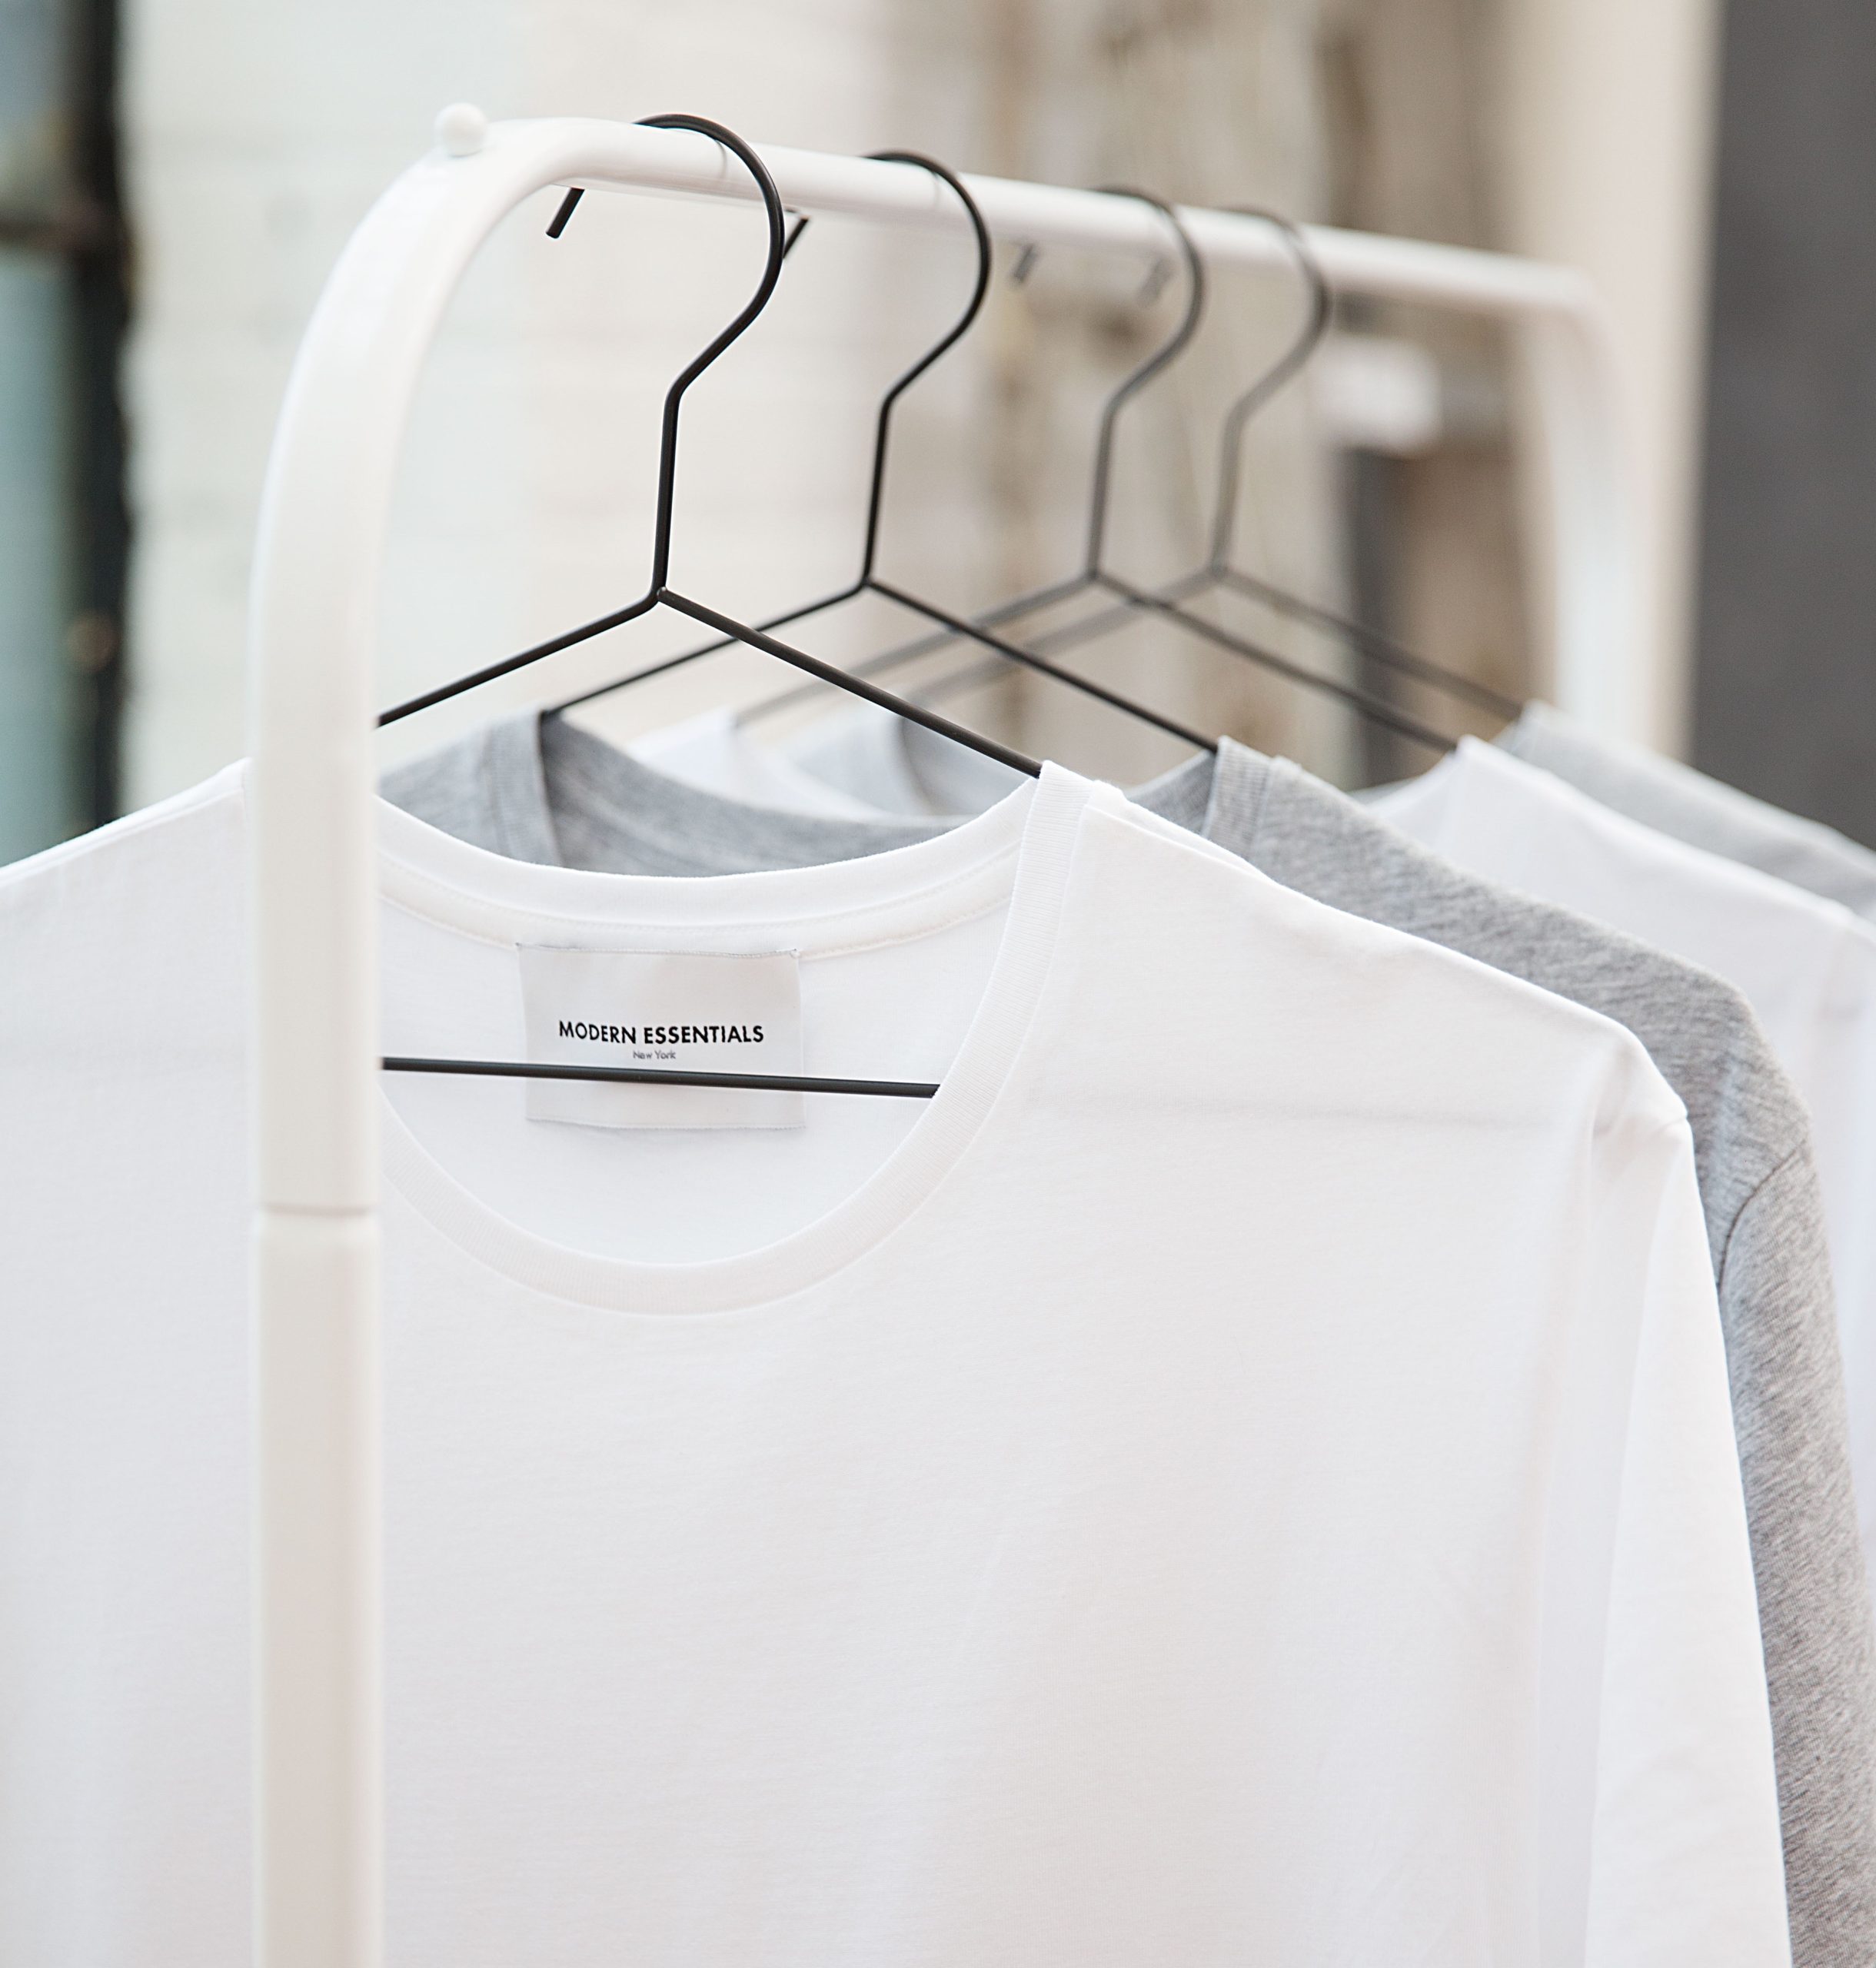 clothing rack with a few white and grey t-shirts on it